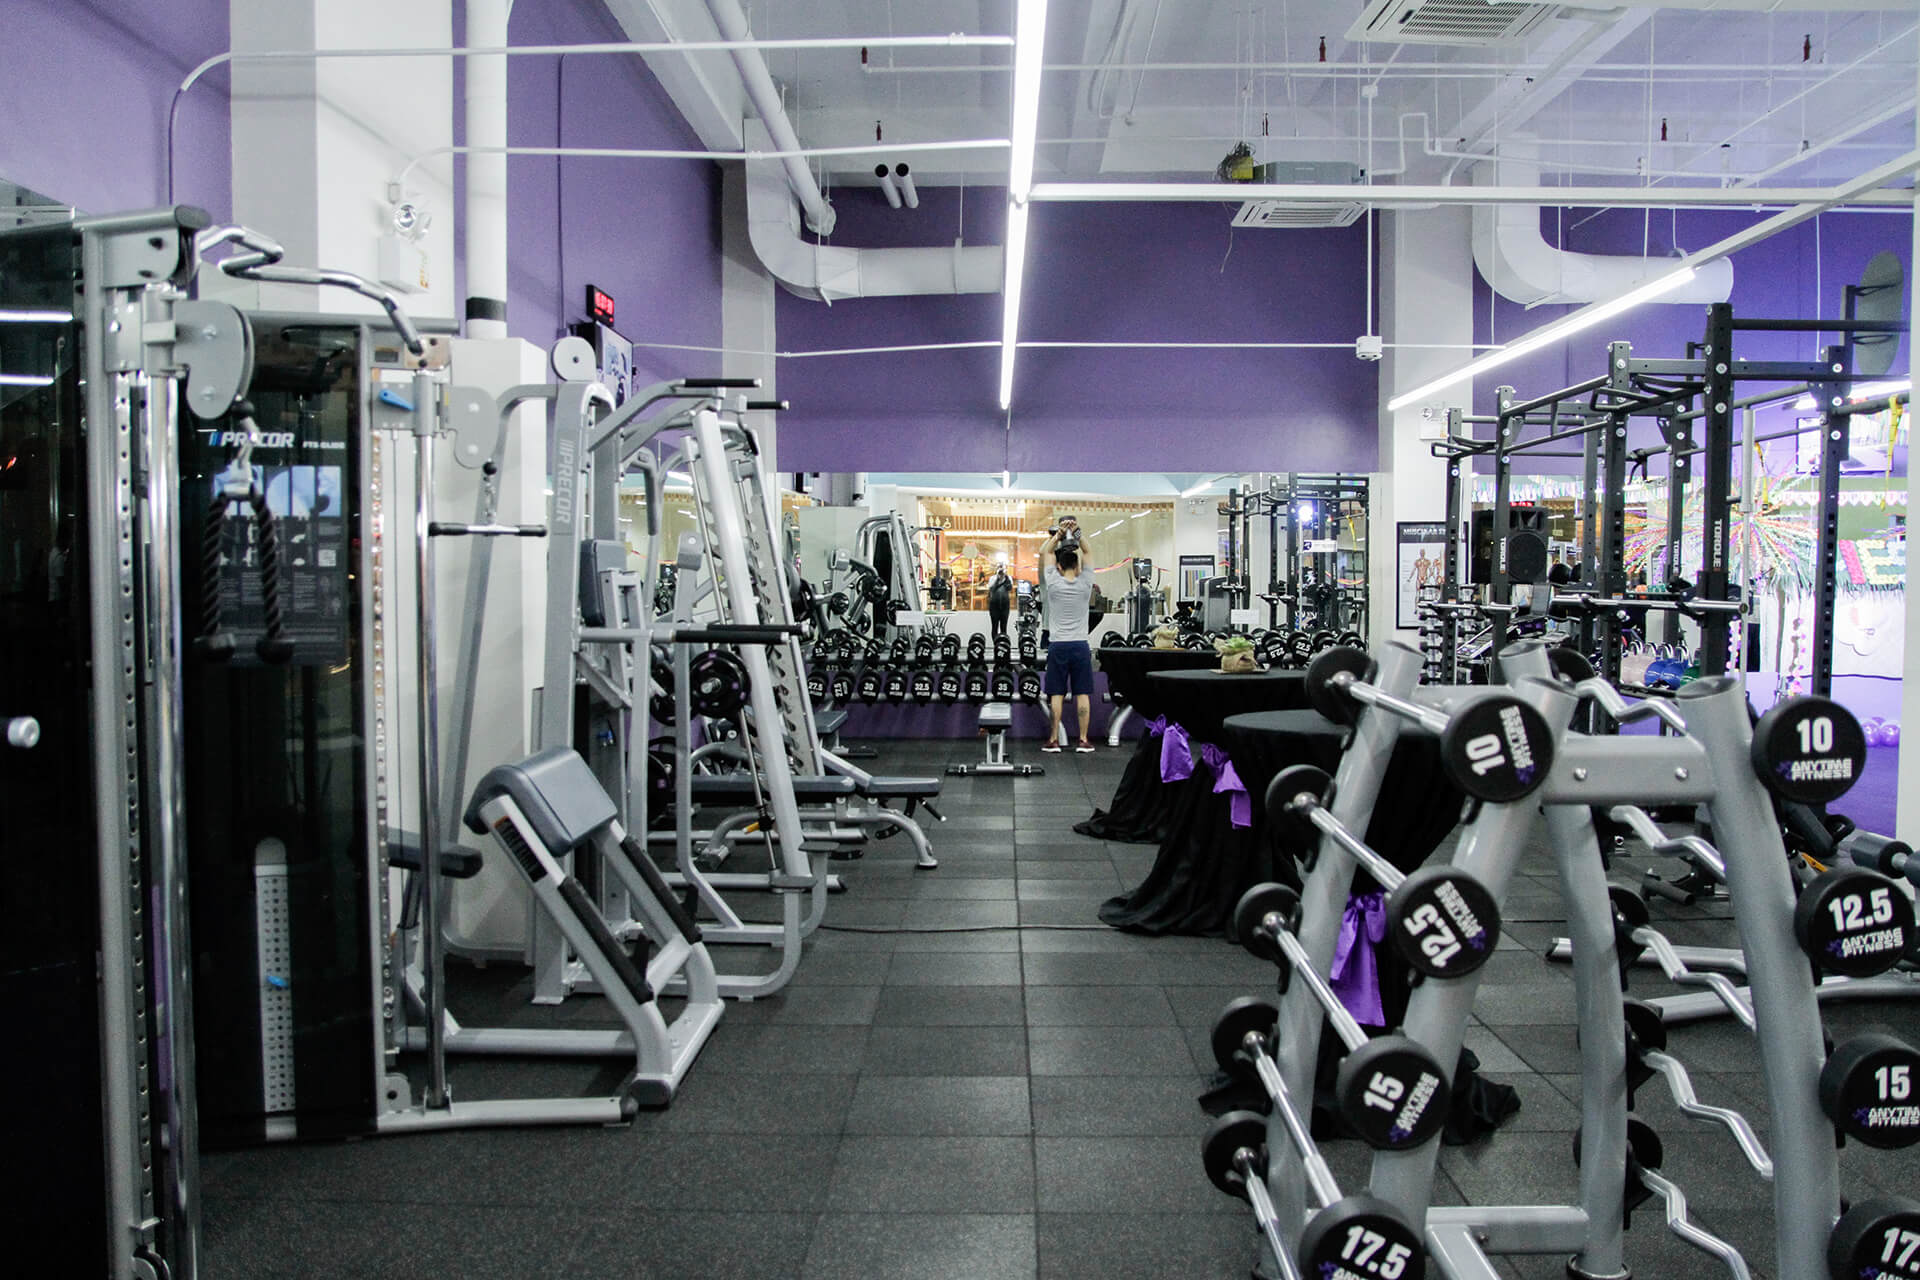 https://gymtakeover.com/wp-content/uploads/2021/01/anytime-fitness-gym.jpg